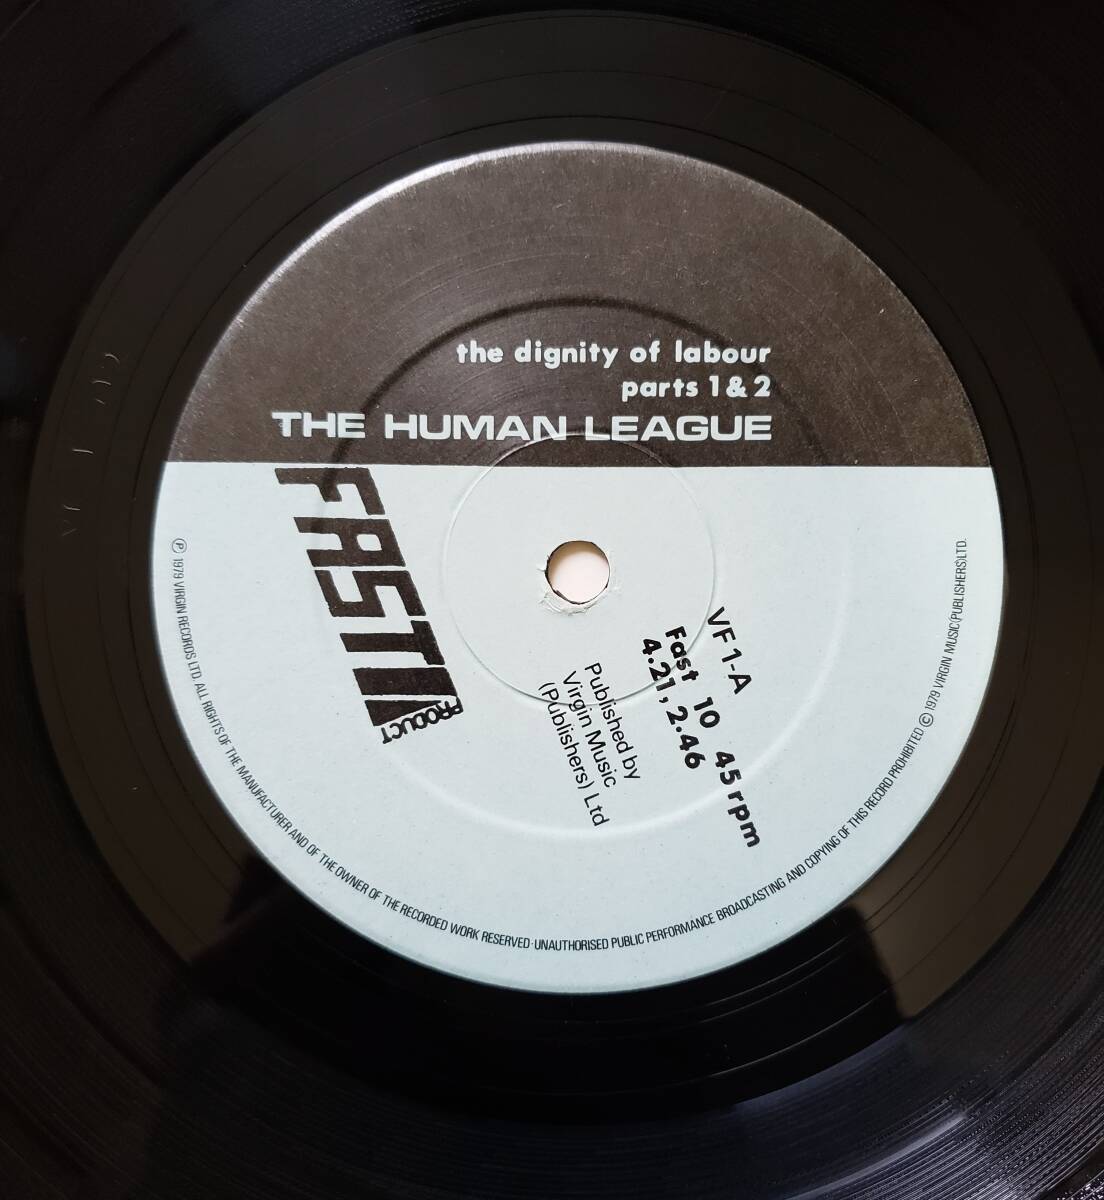 12inch UK盤 THE HUMAN LEAGUE ■ THE DIGNITY OF LOBOUR PTS.1-4 ■ 45回転EPの画像4